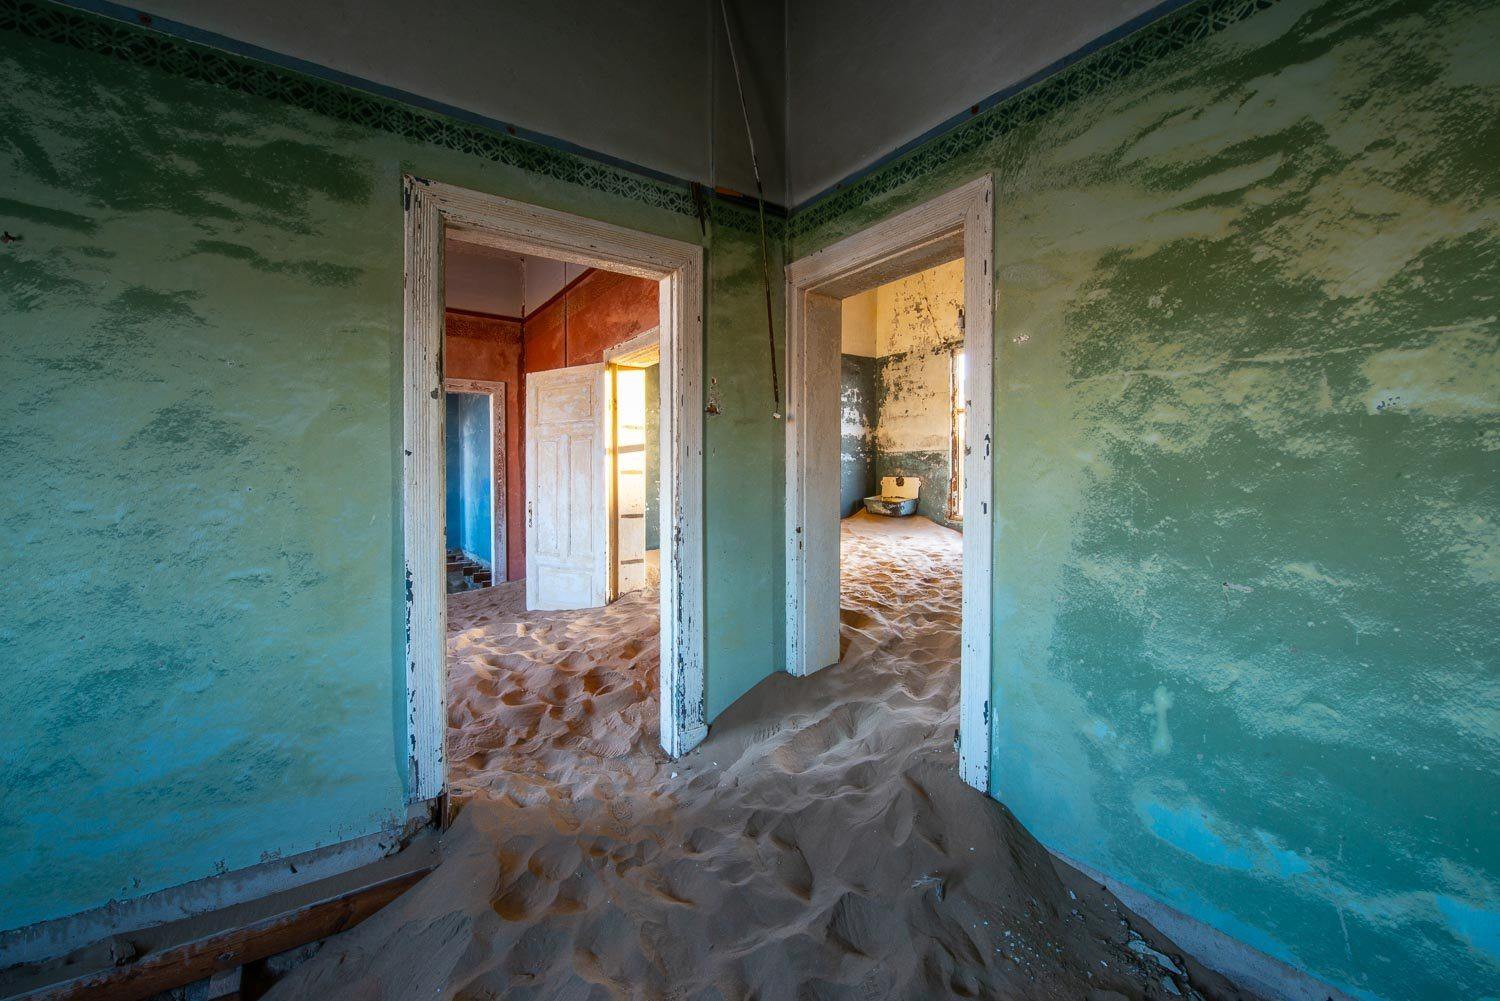 Making of a house with no doors and a lot of sand in the rooms, Kolmanskop #20